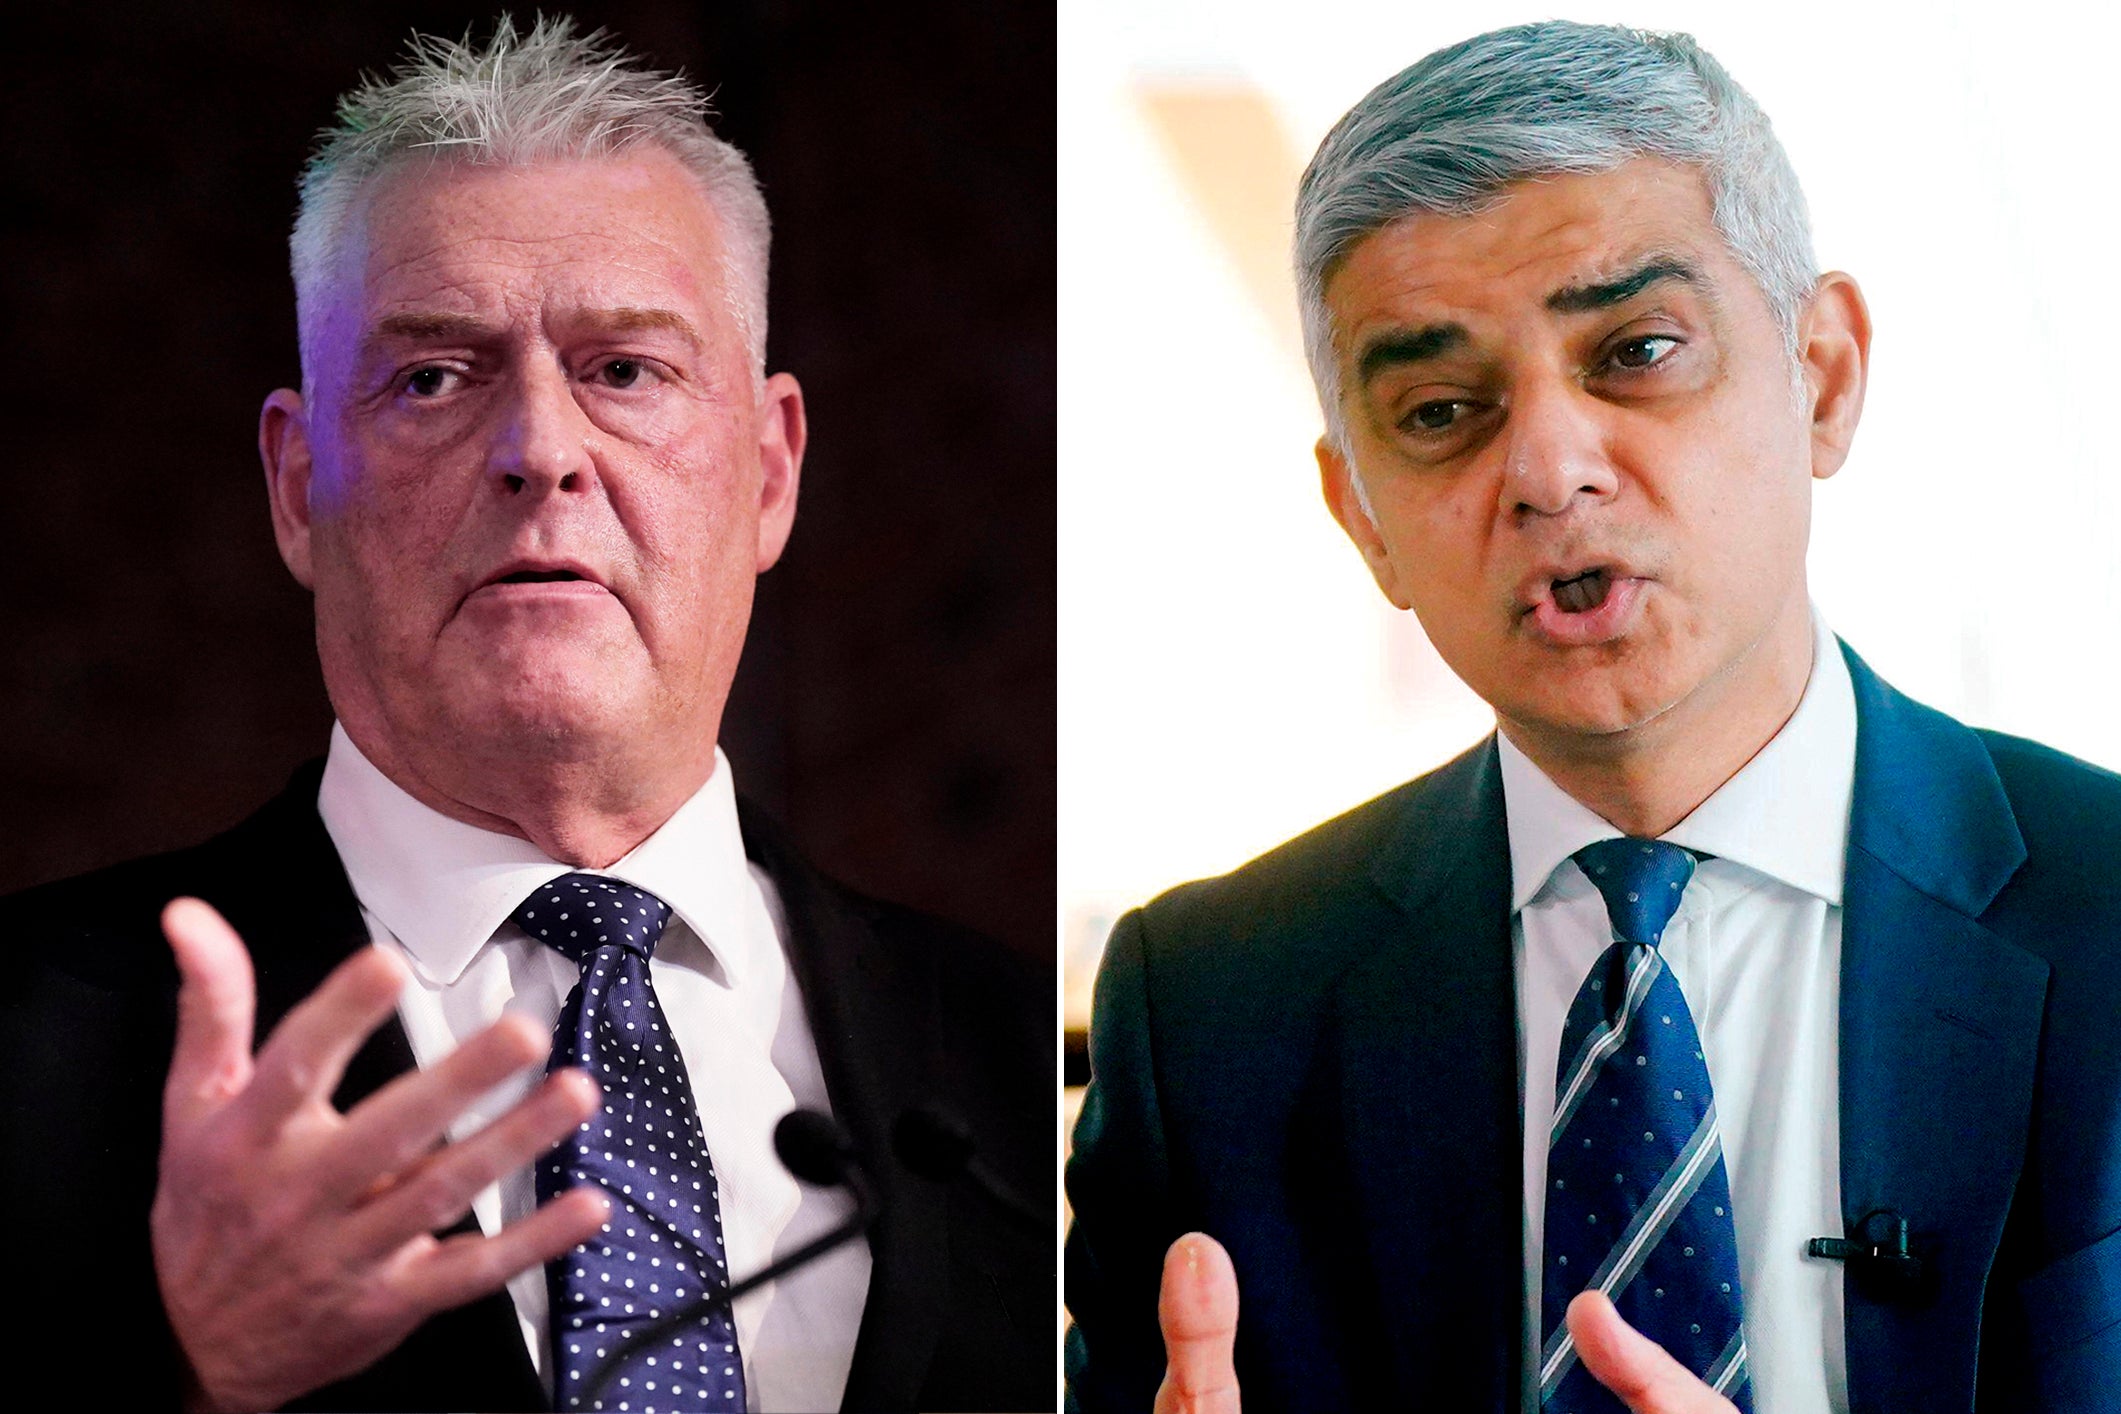 After the outburst from Lee Anderson, Sadiq Khan said ‘blatant anti-Muslim hatred is being tolerated from top to bottom of the Tory party’